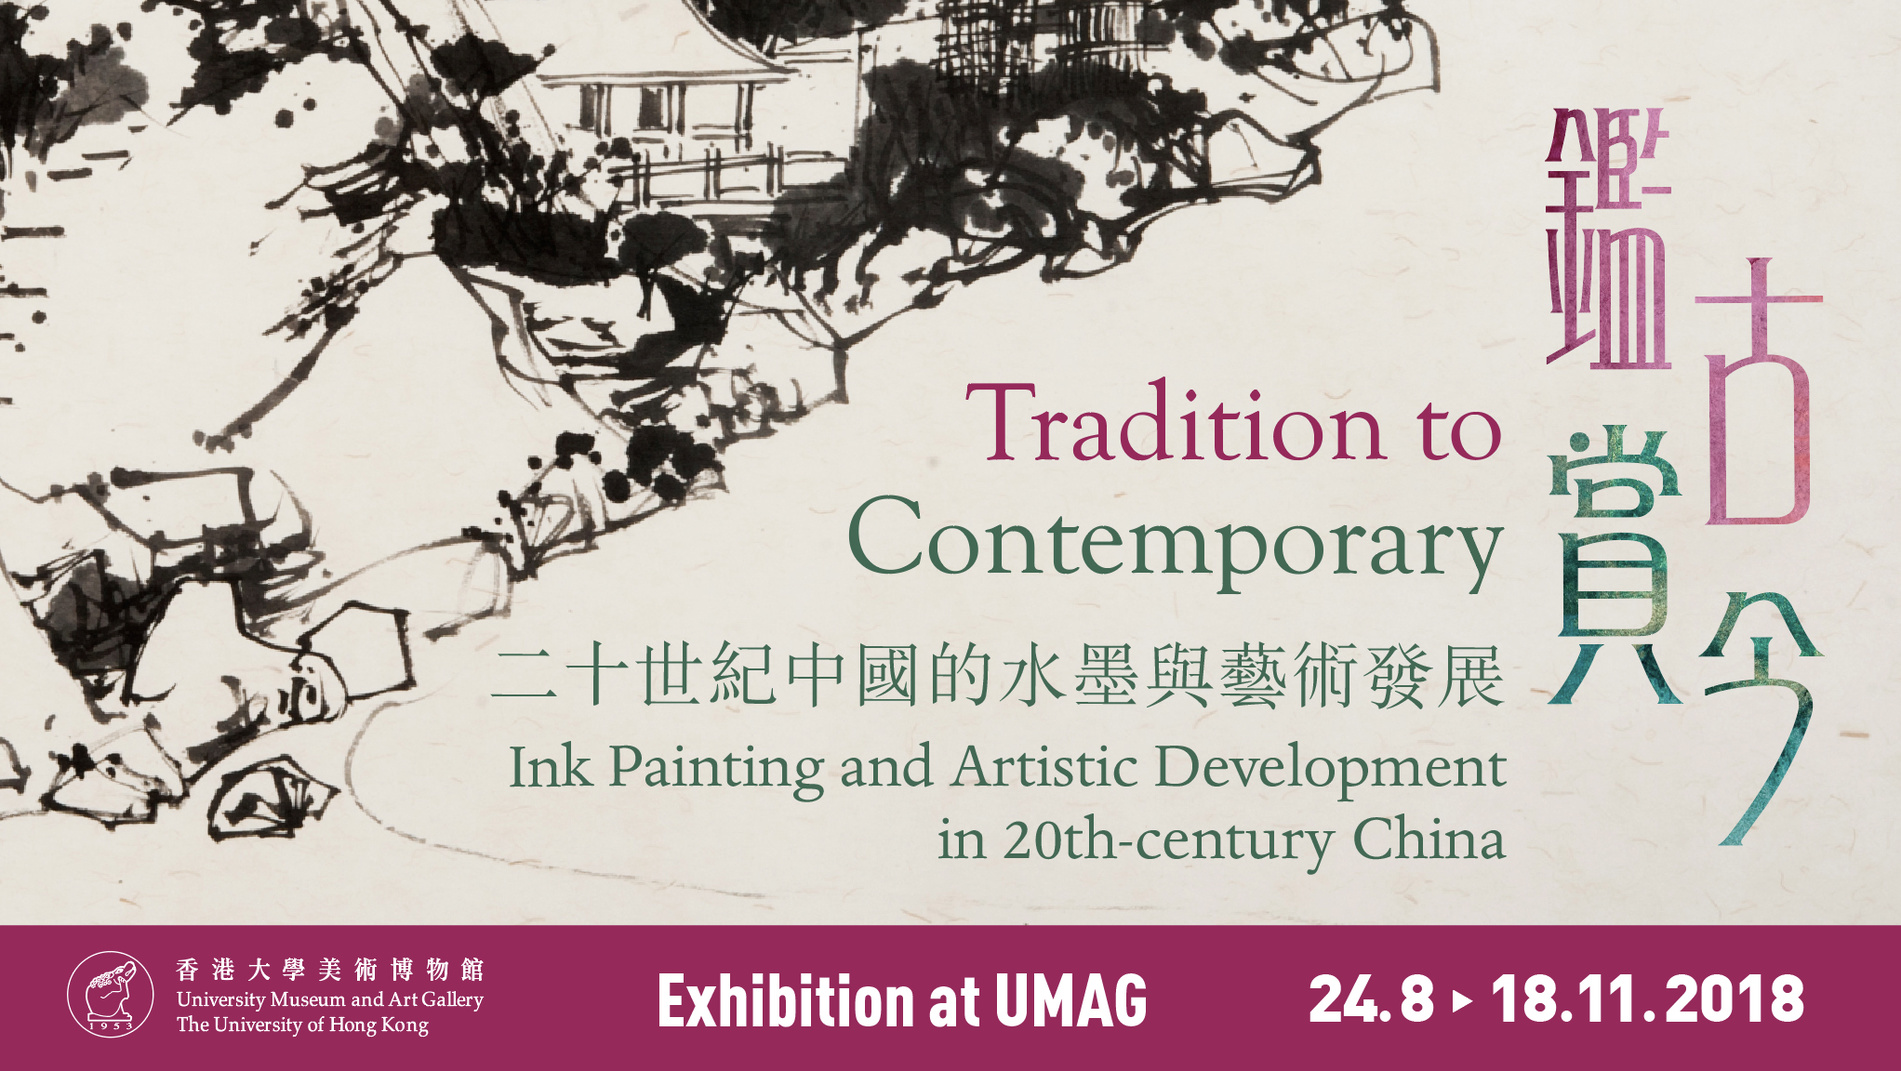 Tradition to Contemporary: Ink Painting and Artistic Development in 20th-century China